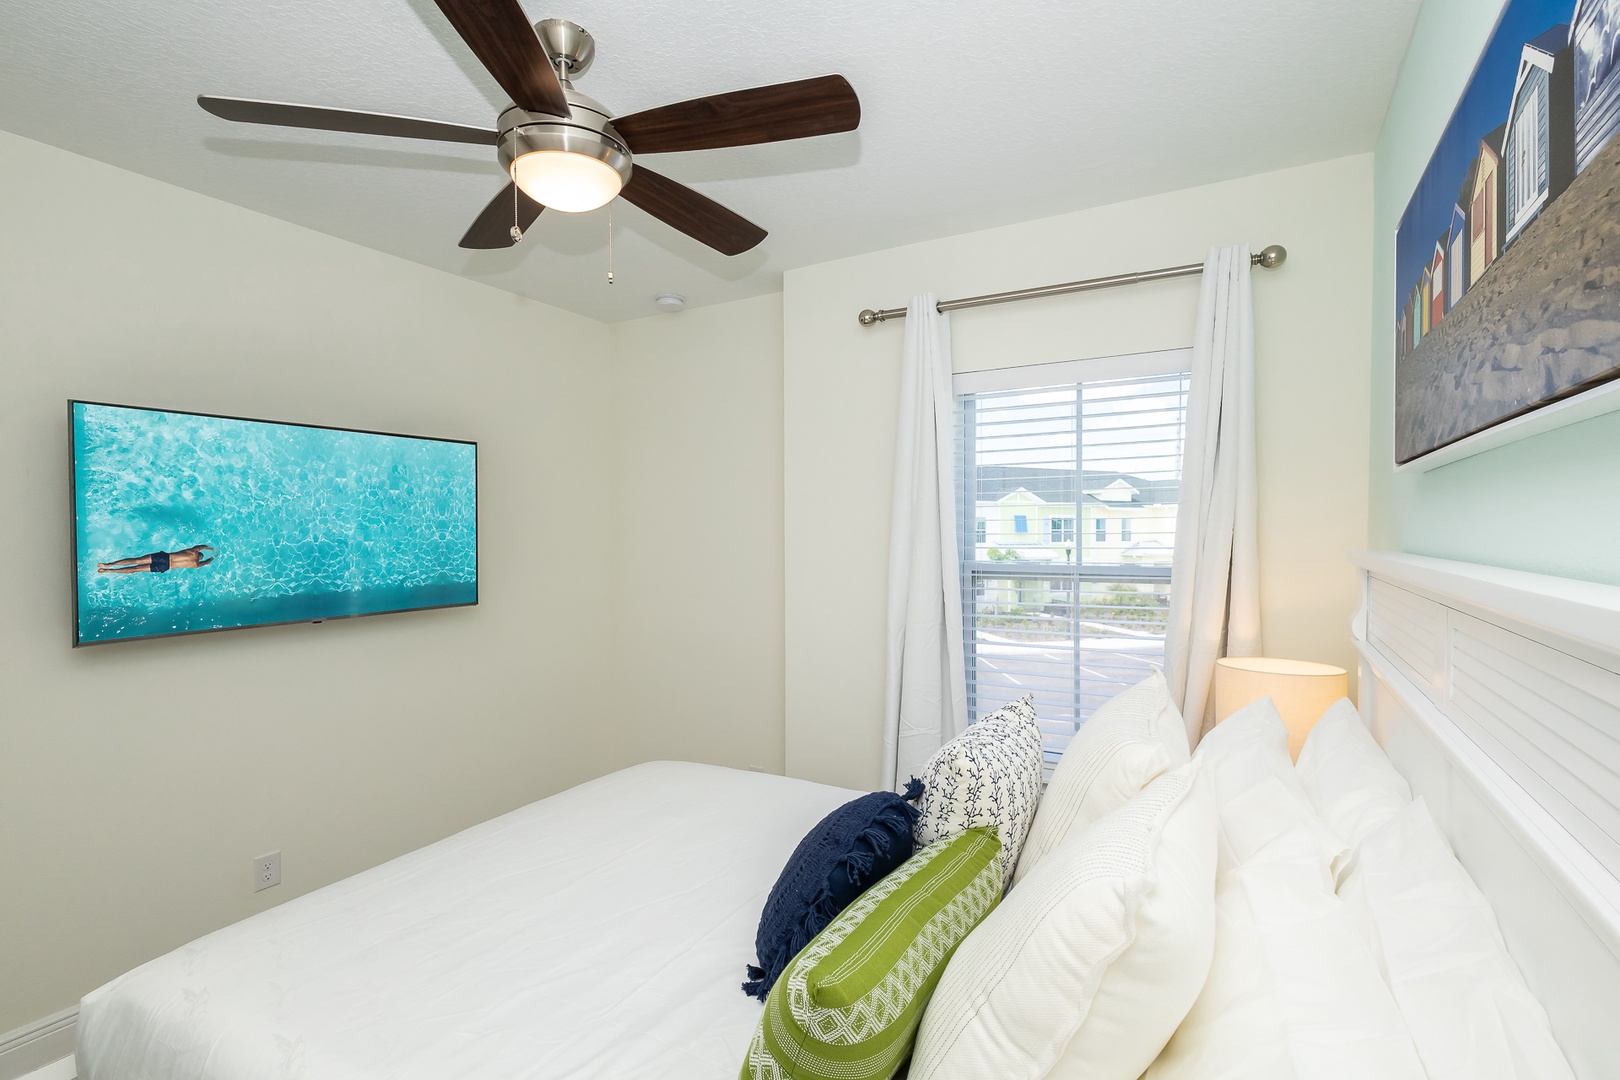 This serene queen bedroom on the 2nd floor includes a Smart TV & ceiling fan